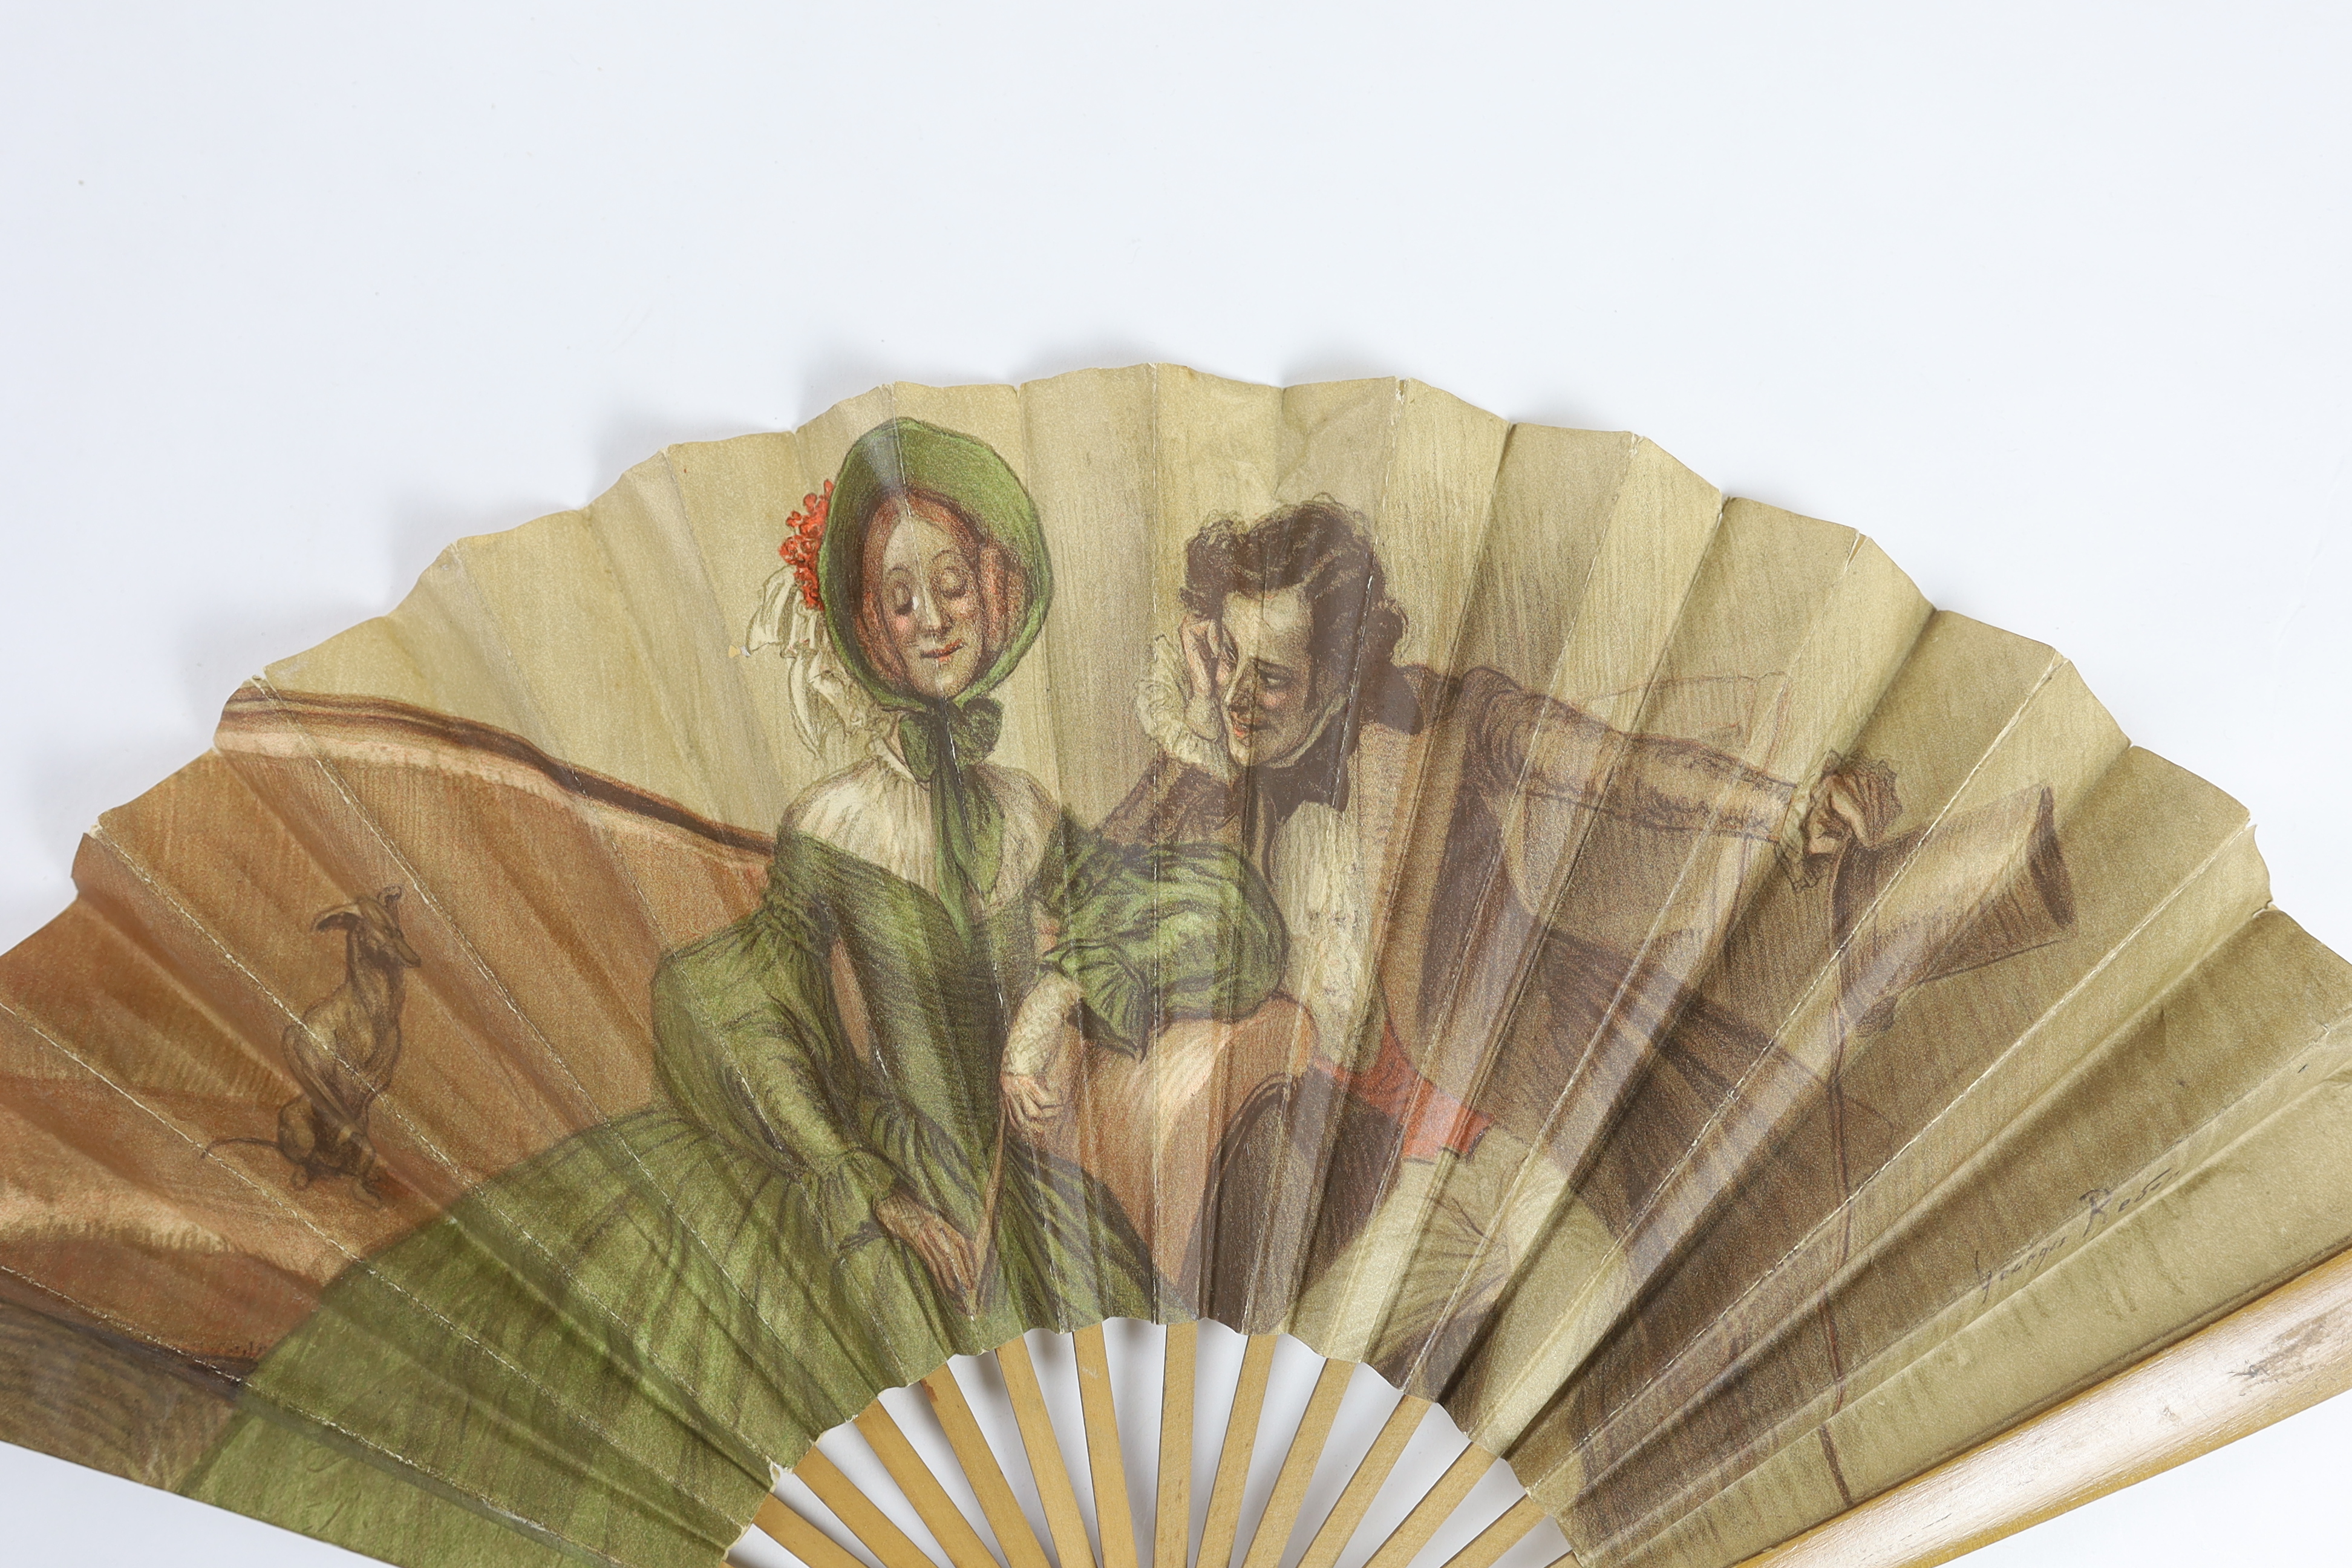 An unusual late 19th / early 20th century paper advertising fan for The Carlton Hotel, London (as printed on the back of fan leaf), signed on the front Georges Reson